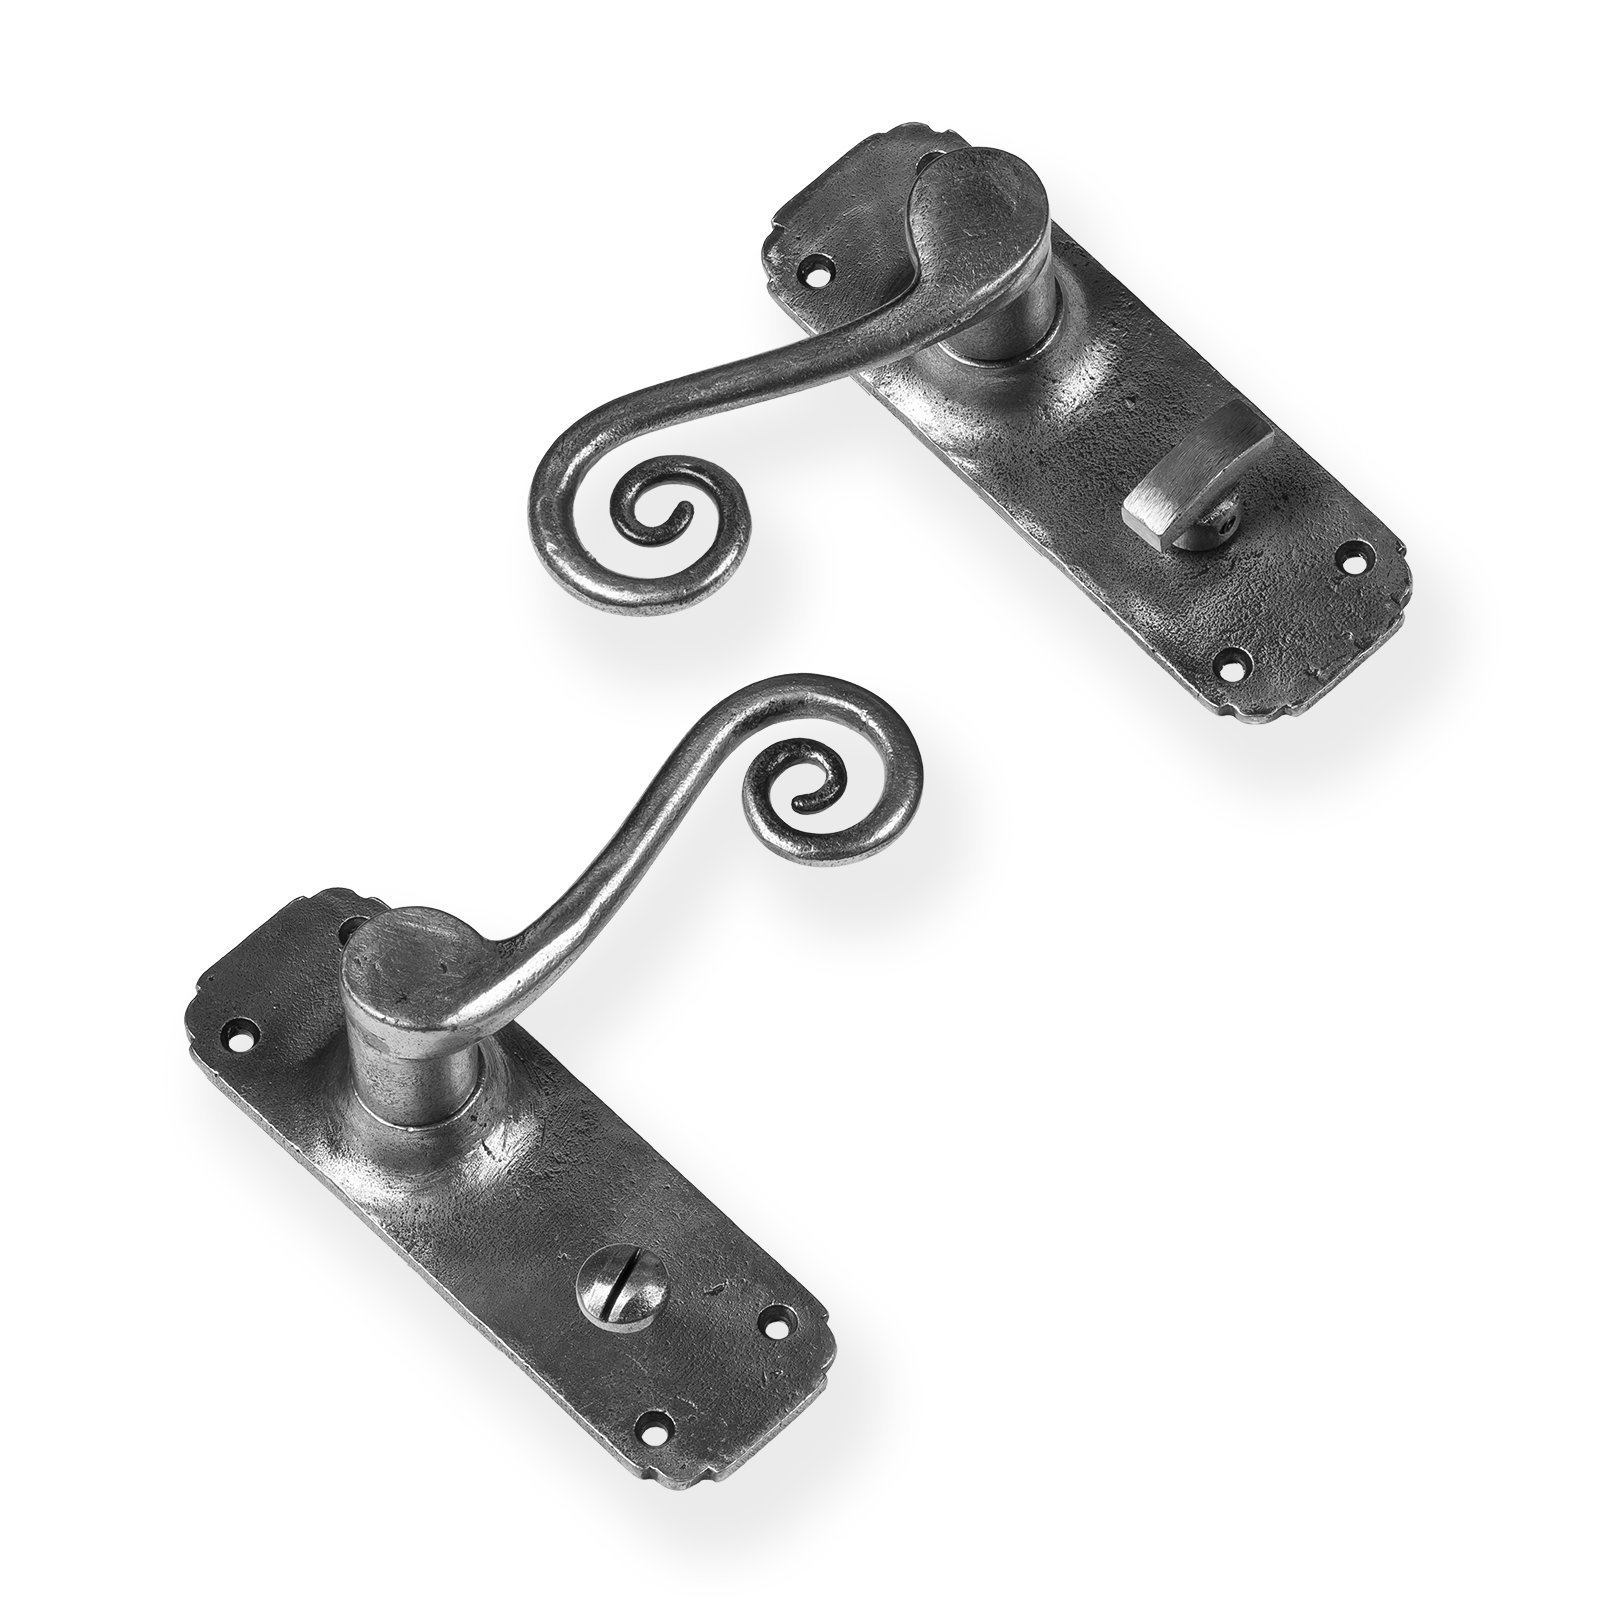 Monkey Tail Lever Handle Pewter